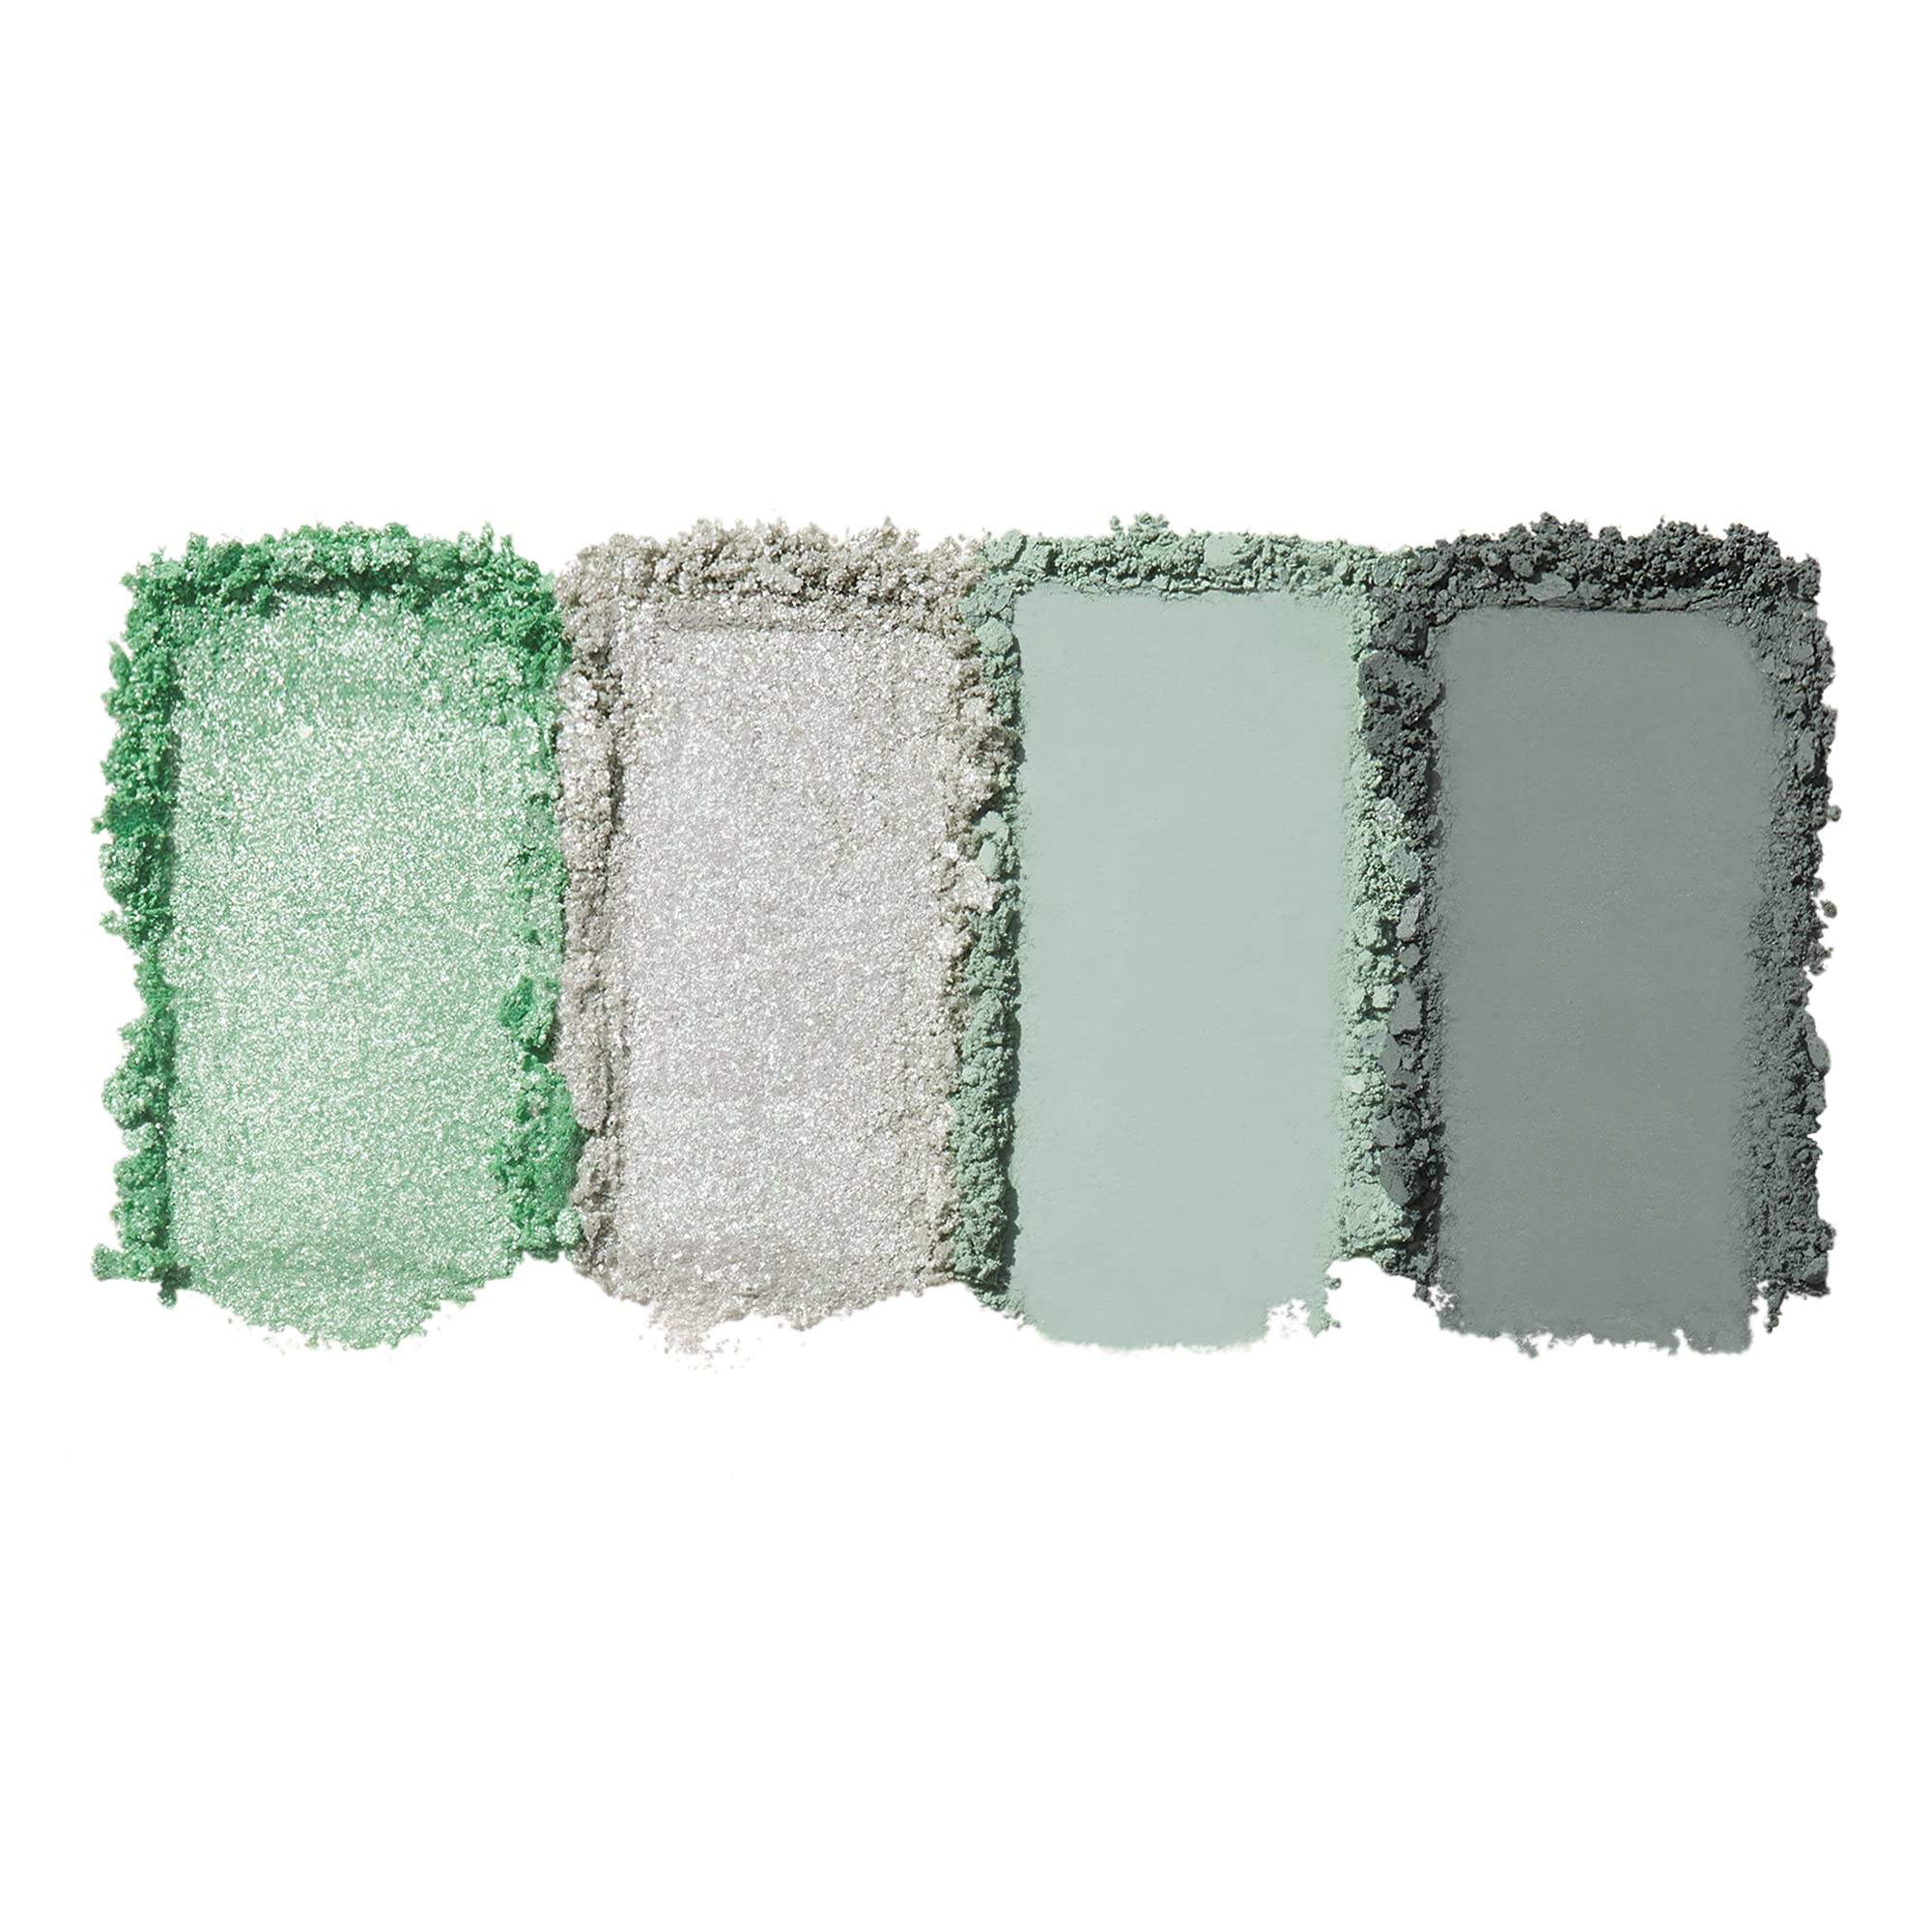 e.l.f. Mini Melt Eyeshadow, Pigment-packed, Eyeshadow Quad Featuring A Mix of Matte & Shimmer Shades, On-The-Go Size, Vegan & Cruelty-Free, Mint To Be